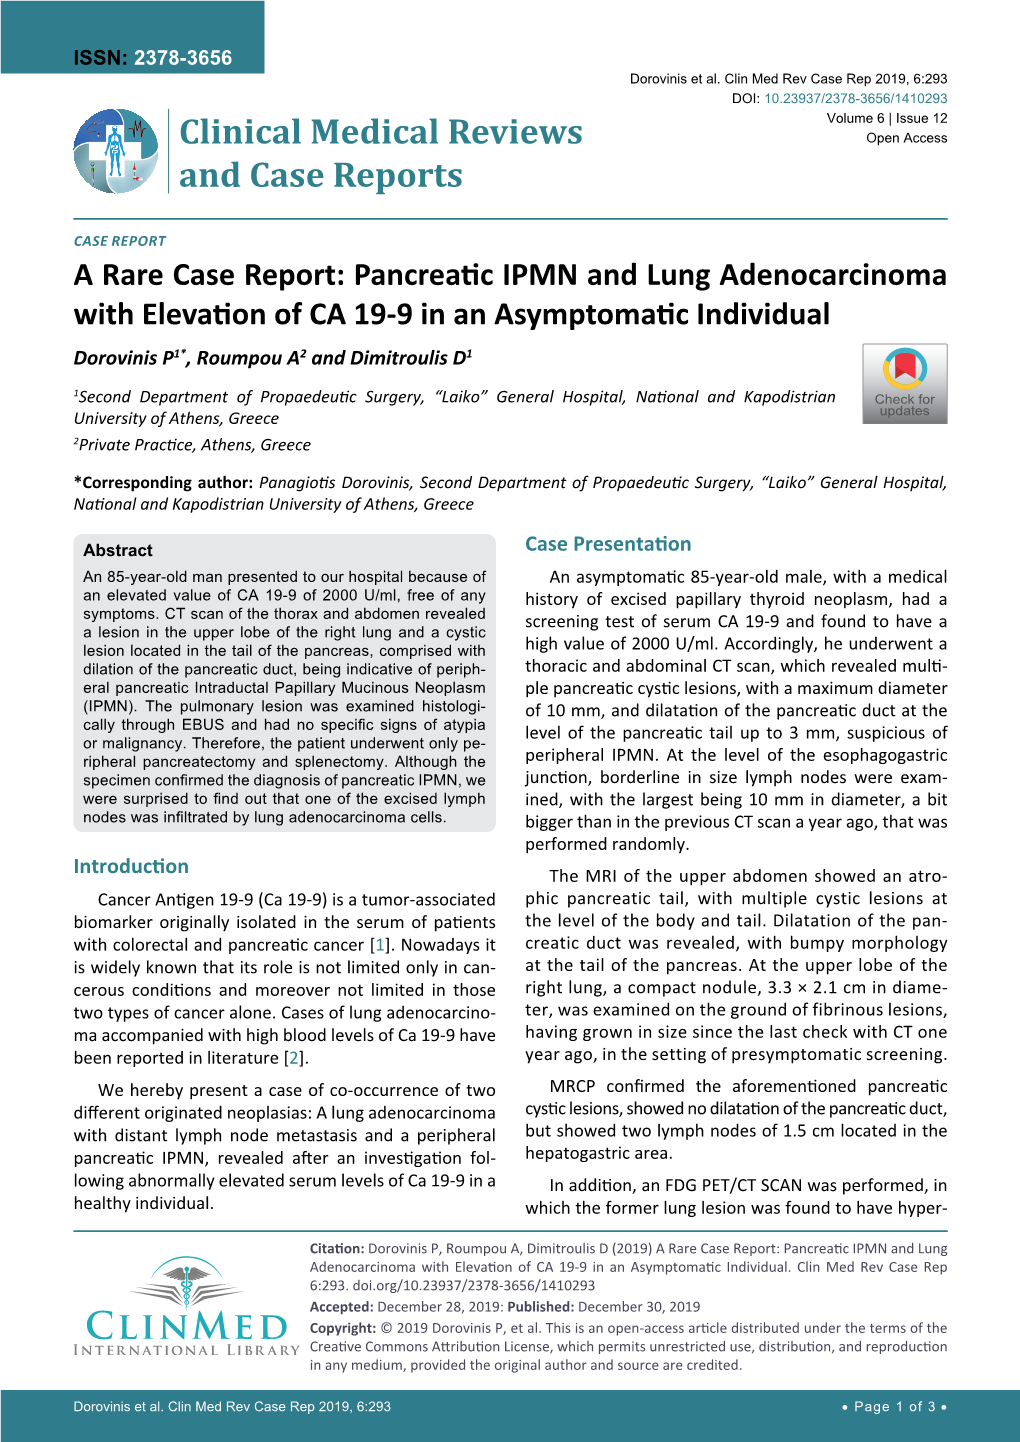 A Rare Case Report: Pancreatic IPMN and Lung Adenocarcinoma with Elevation of CA 19-9 in an Asymptomatic Individual Dorovinis P1*, Roumpou A2 and Dimitroulis D1